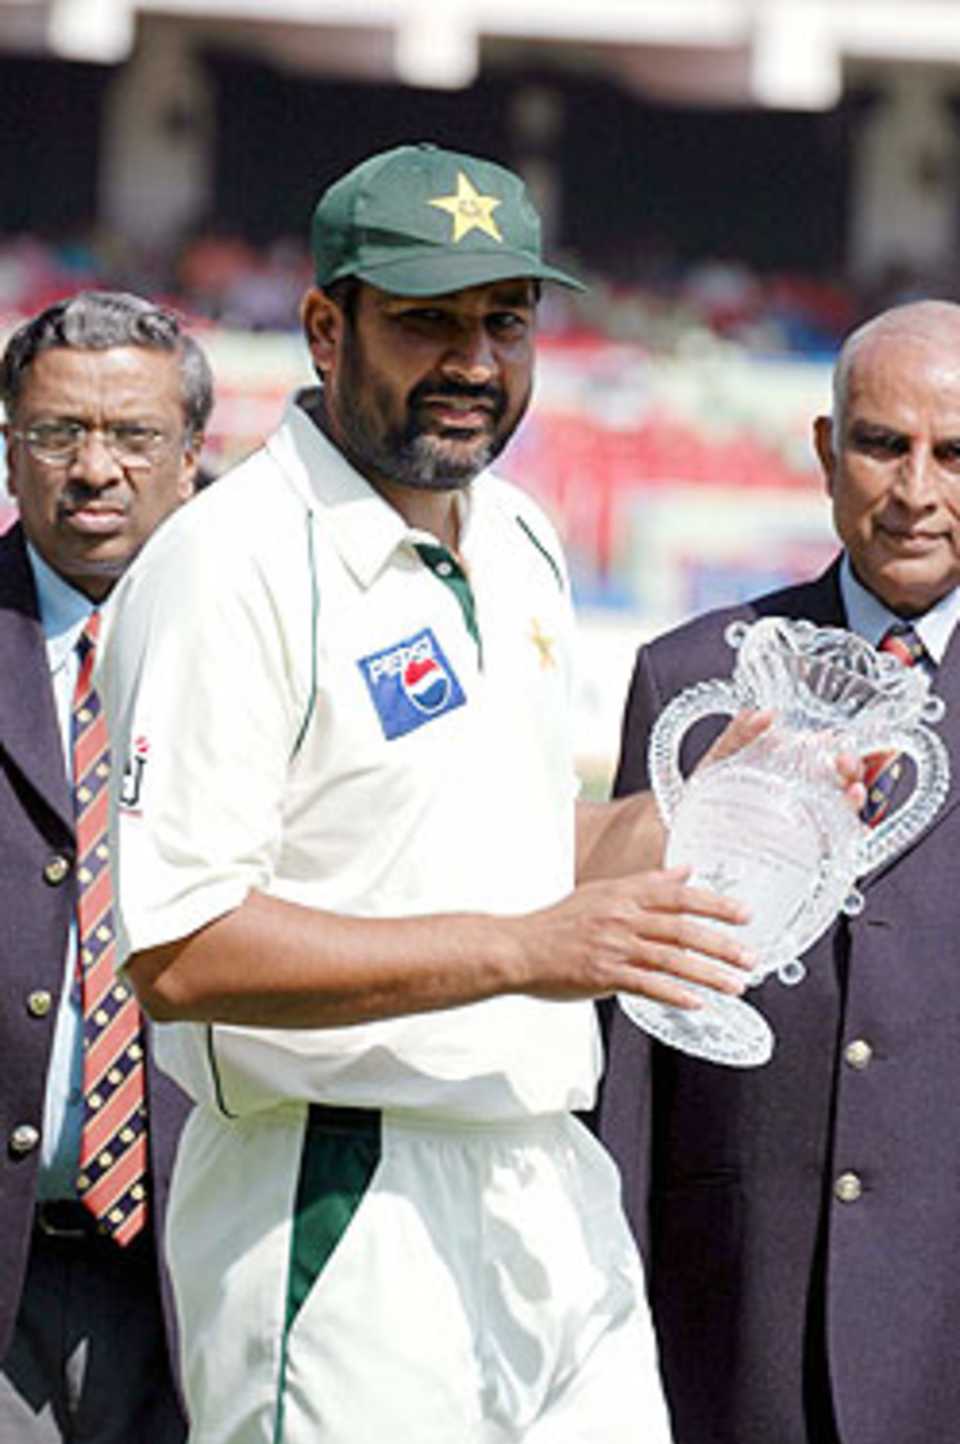 For Pakistan captain Inzamam-ul-Haq, the Bangalore test will be a memorable one for reasons more than one. This was his hundredth test match - he was felicitated by the KSCA for appearing in his 100th test match, he became only the fifth cricketer in test history to score a century in his hundredth test, and finally, to round it up, his team won the test match to level the series 1-1., India v Pakistan, 3rd Test, Bangalore, 24-28 Mar 2005